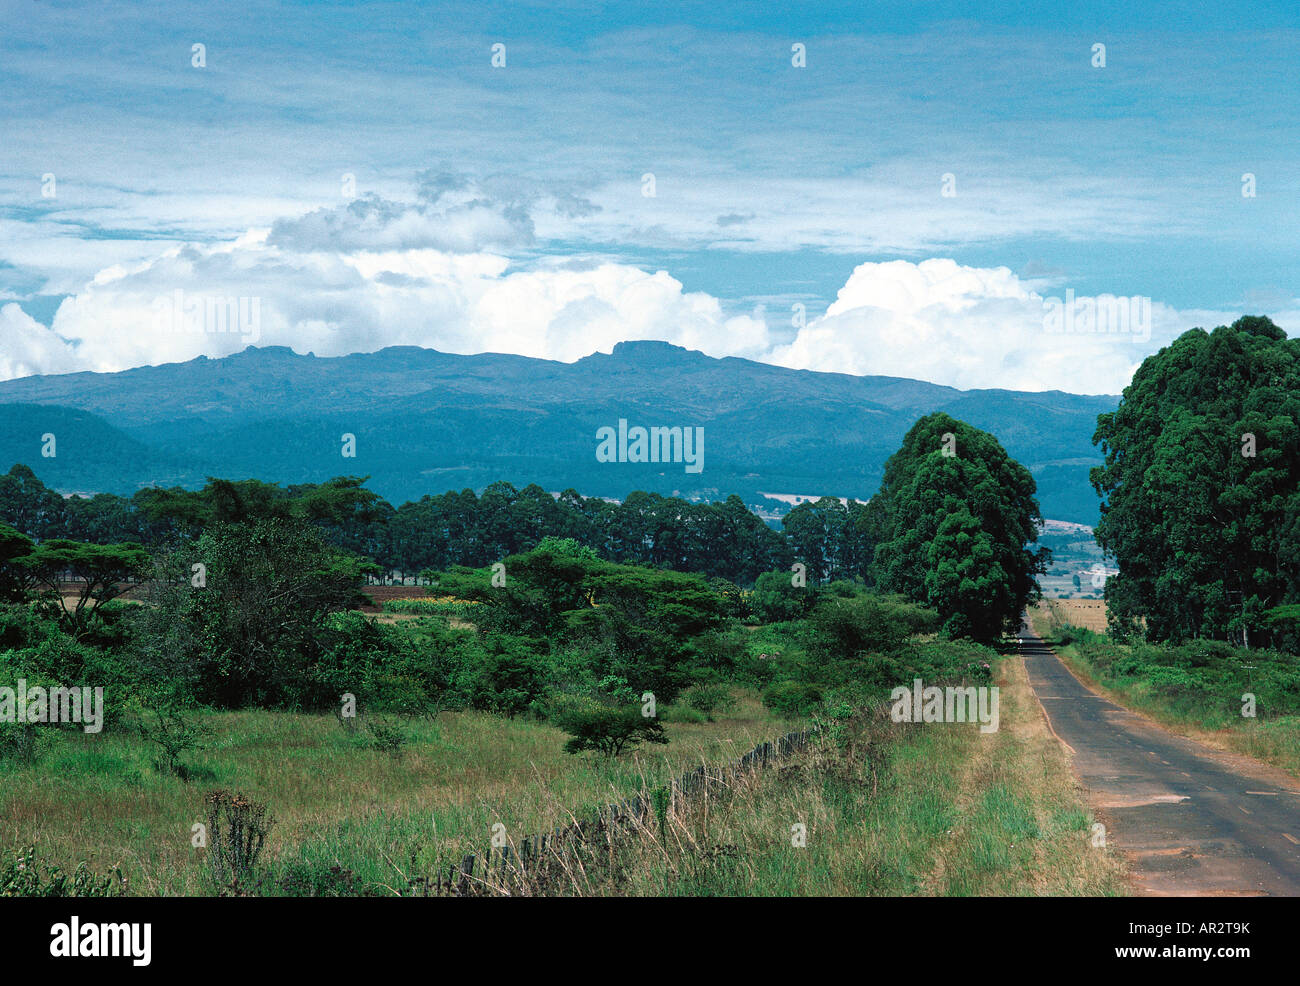 Mount Elgon 14 178 ft and the tarmac road with potholes towards the mountain from Kitale in Western Kenya East Africa Stock Photo